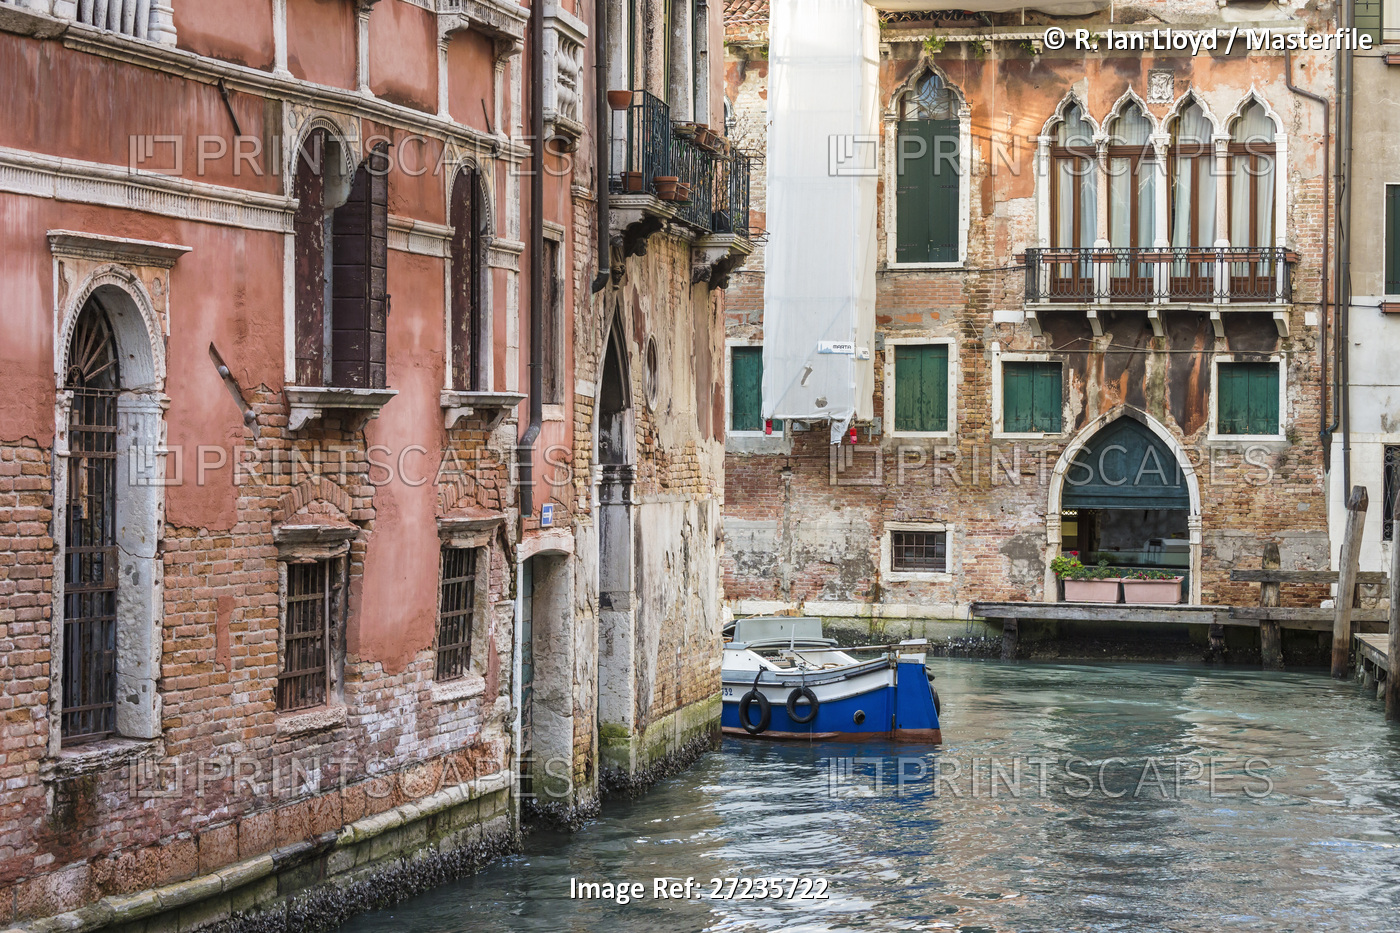 Historical buildings line a canal in Venice, Italy